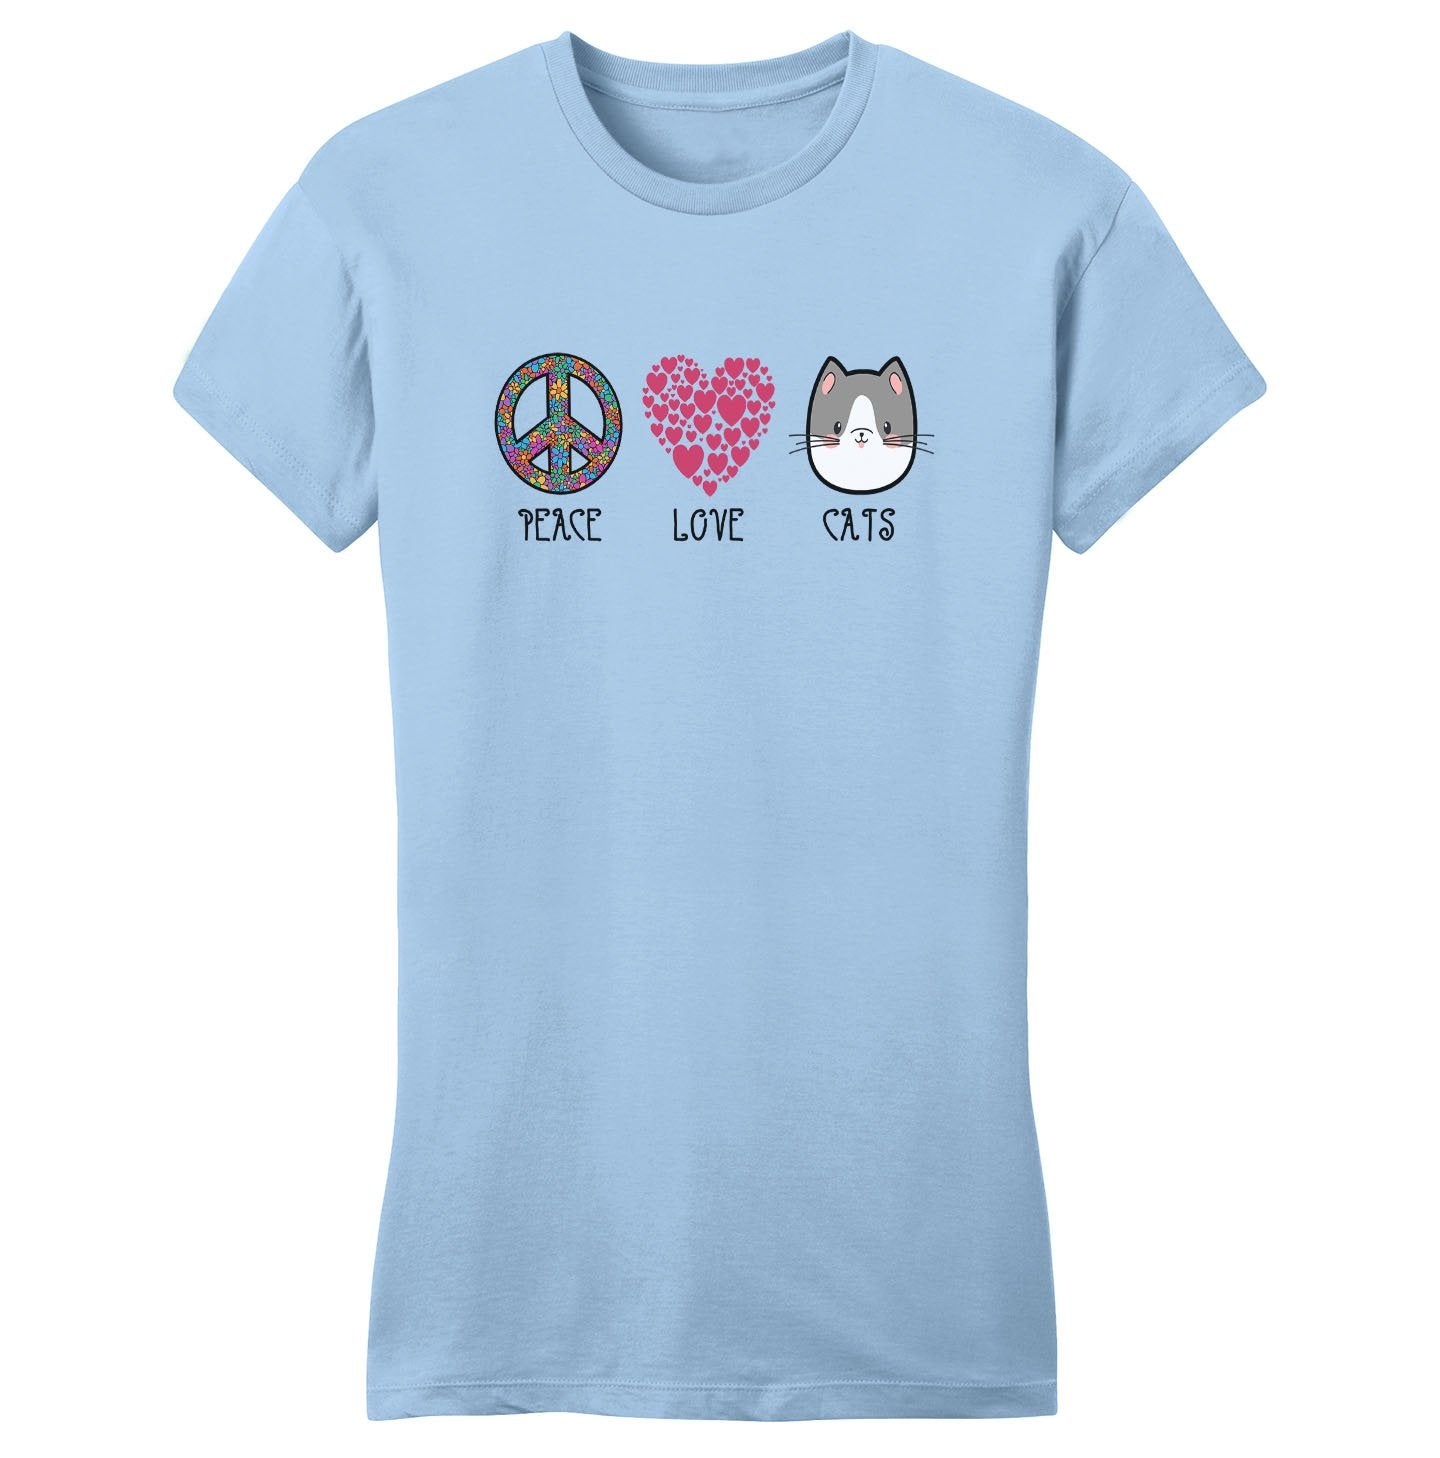 Peace Love Cats - Women's Fitted T-Shirt